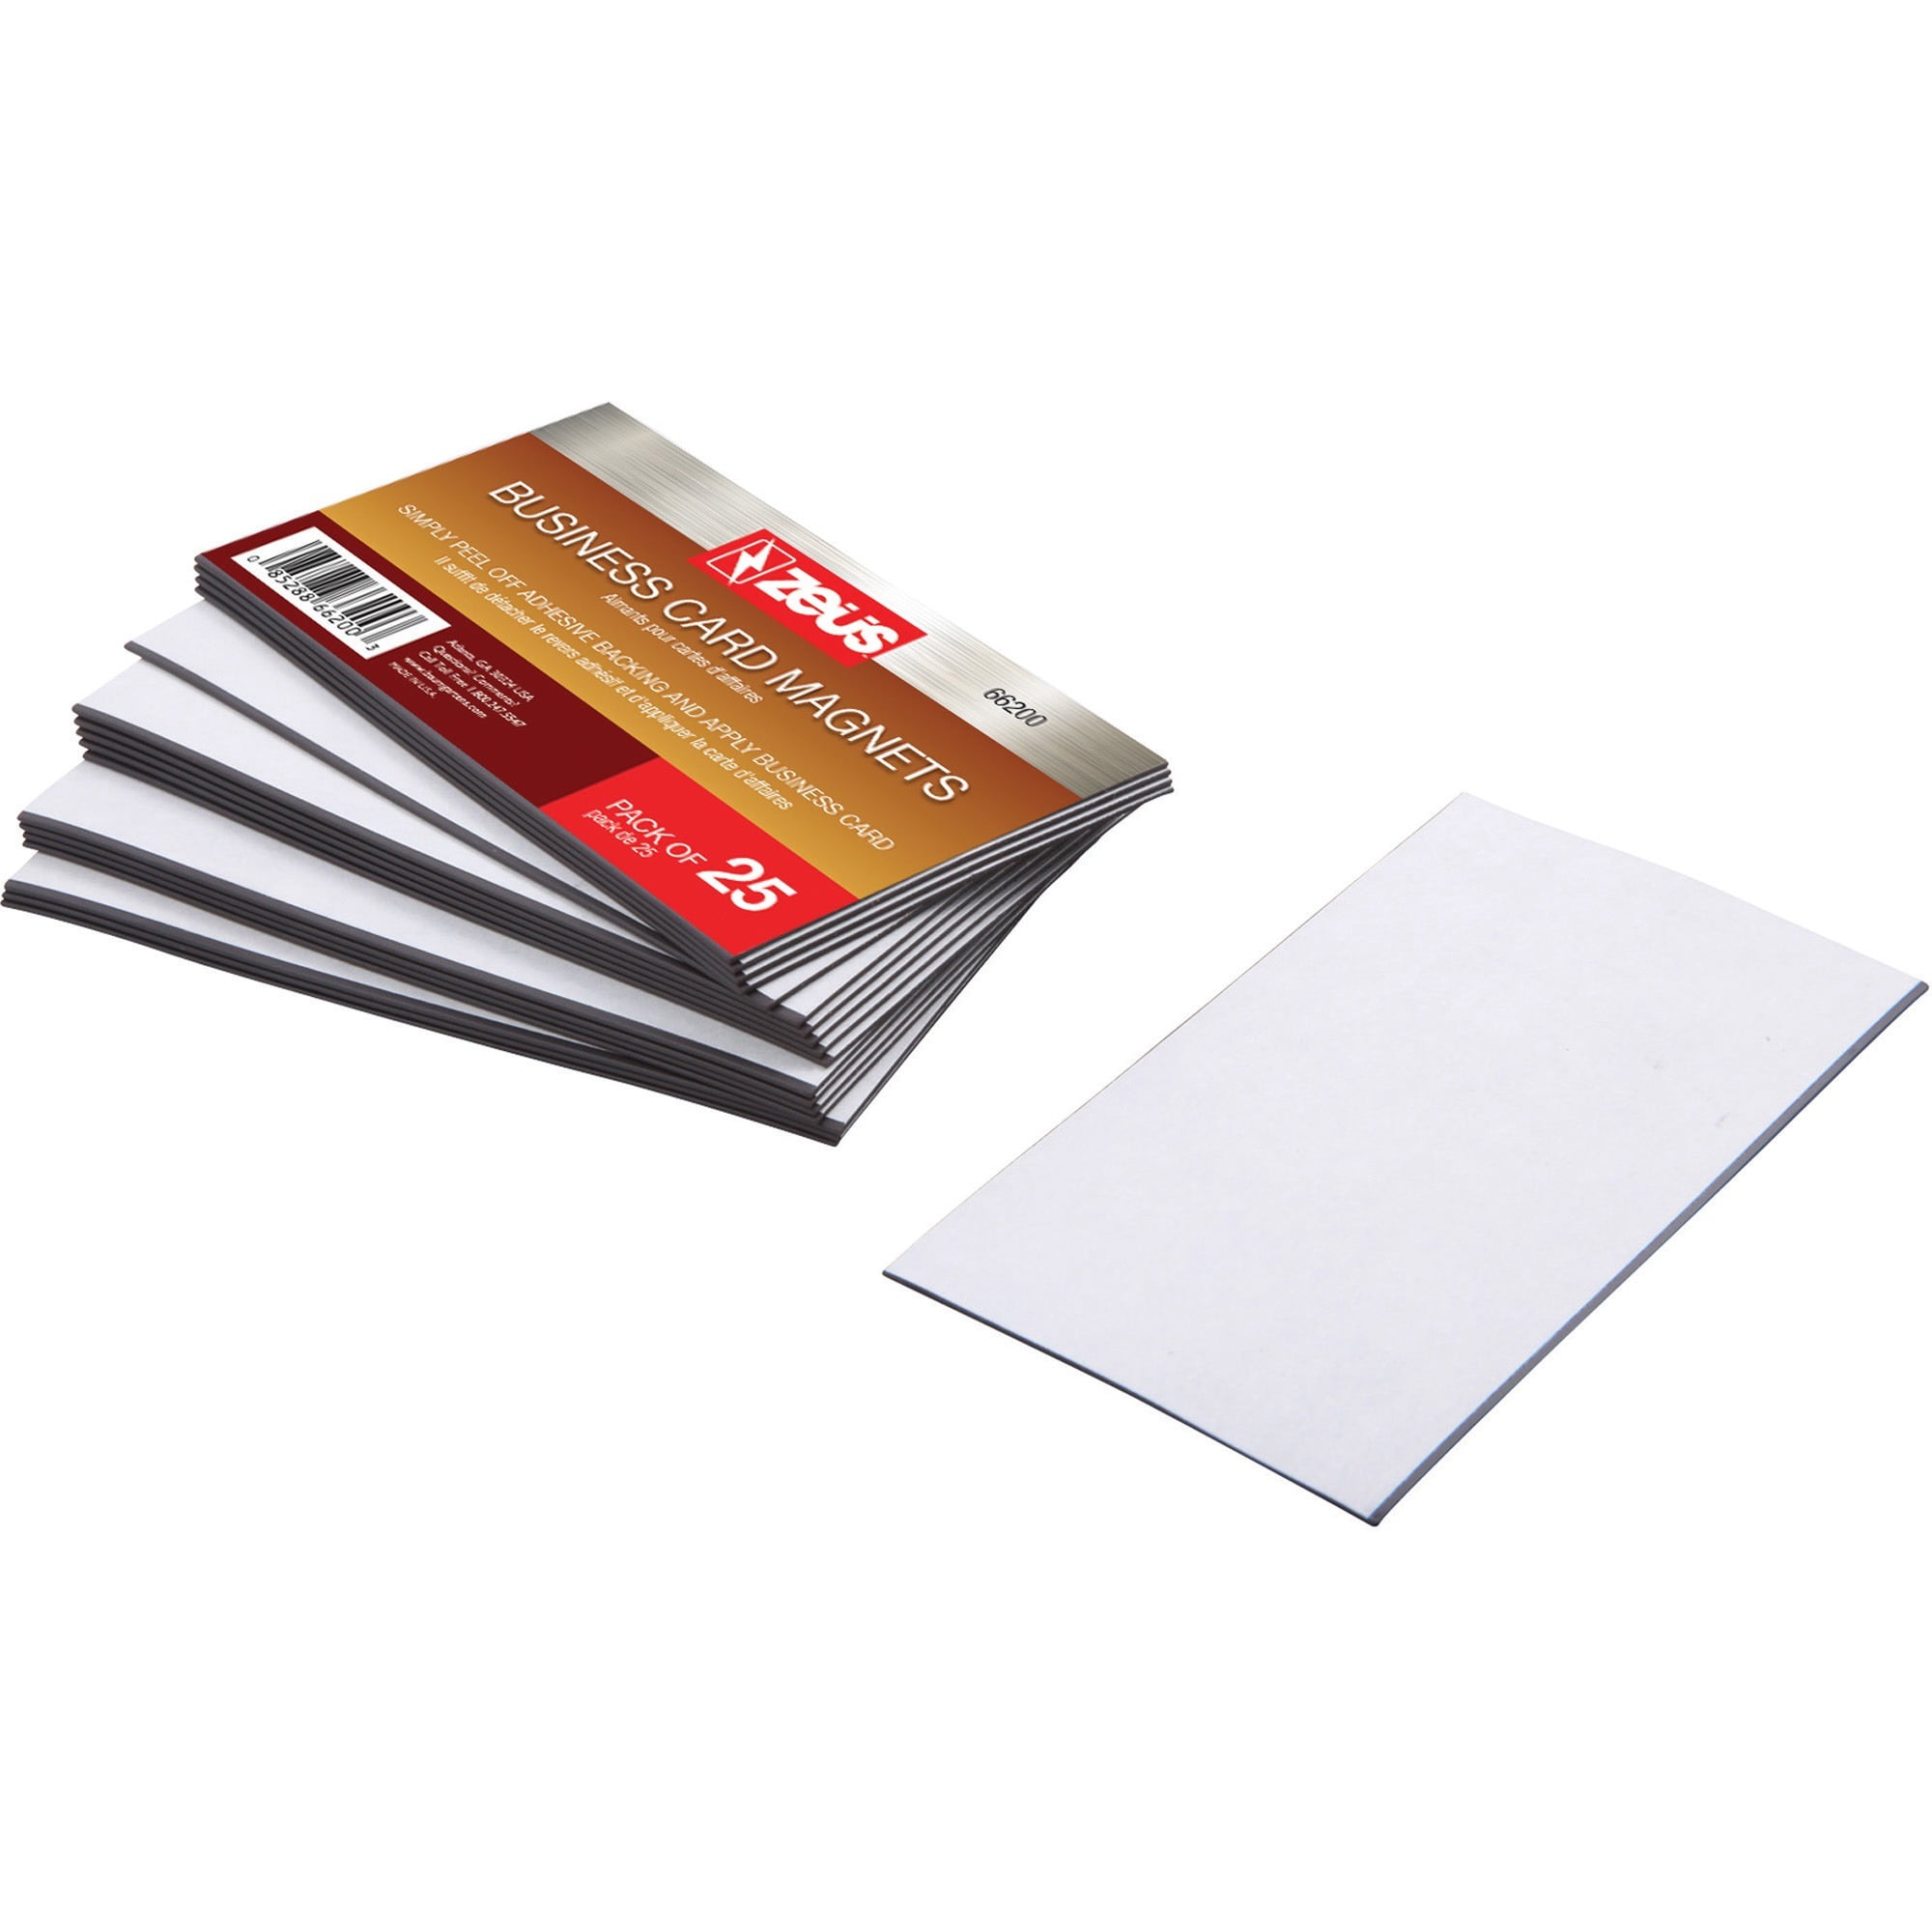 100 Self Adhesive Peel and Stick Business Card Promotional Magnets 